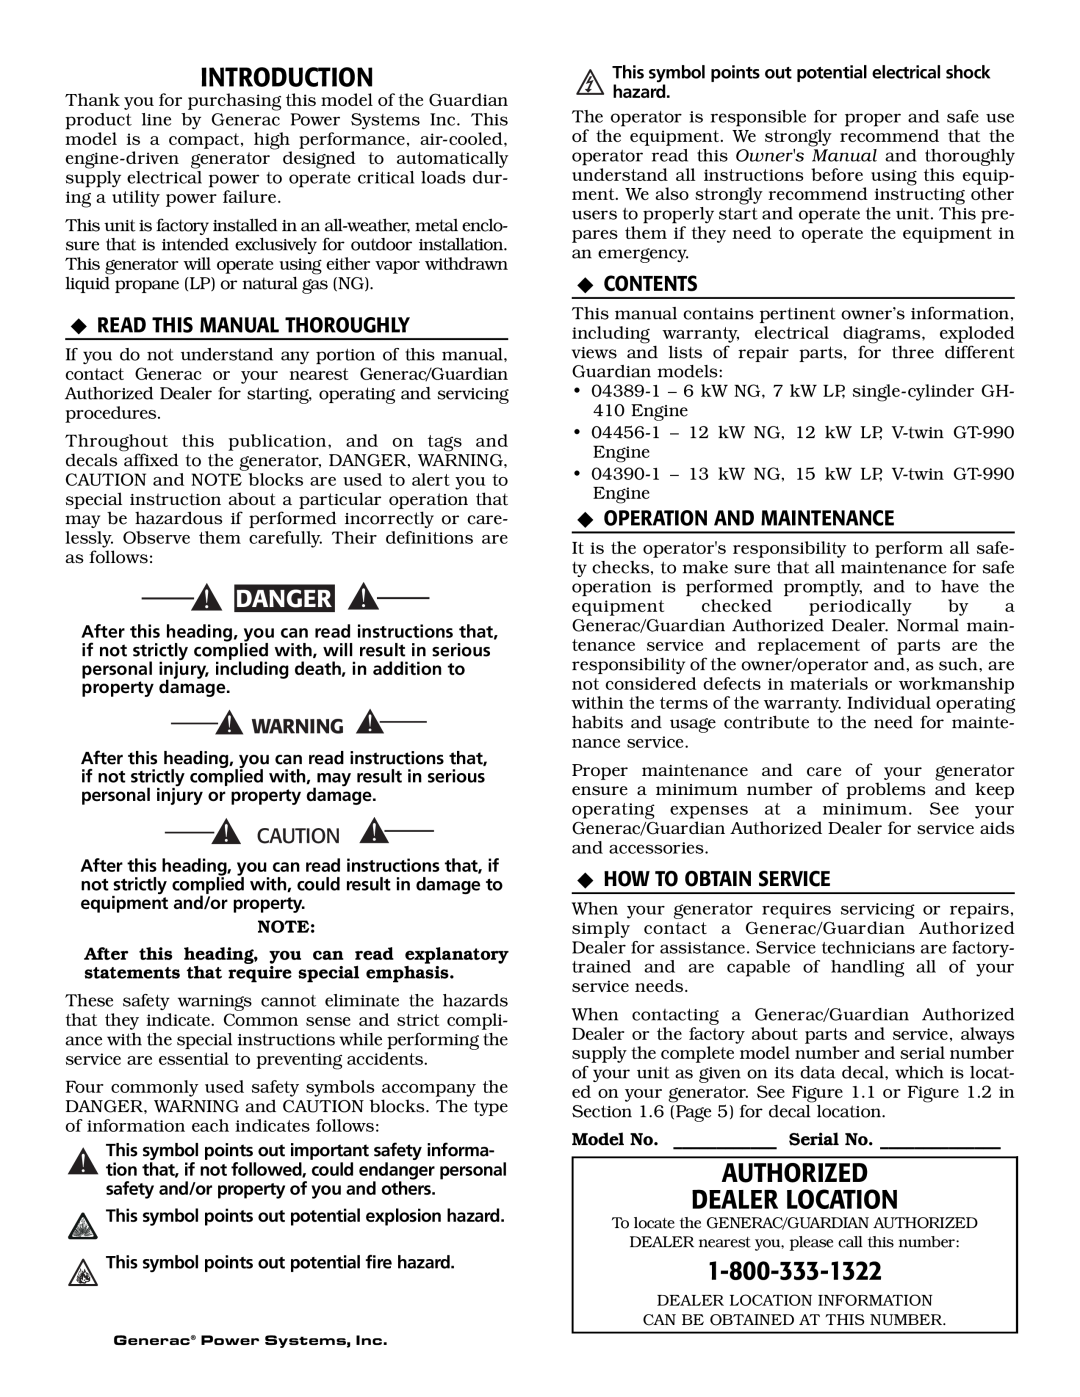 Generac 04389-1, 04456-1, 04390-1 Introduction, Authorized Dealer Location, Danger, ‹Read This Manual Thoroughly 